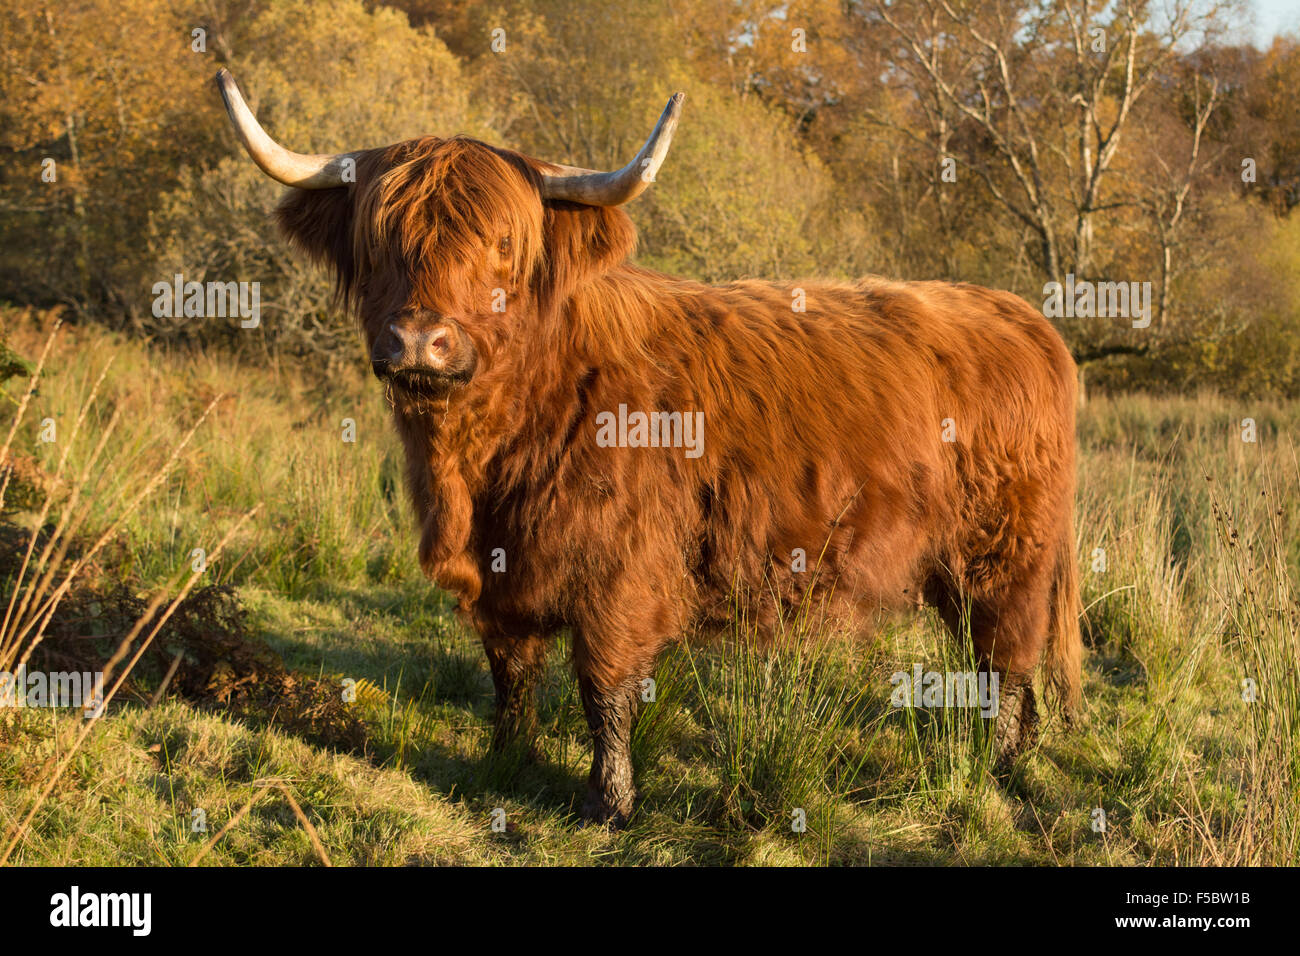 Loch Katrine, Scotland, UK - 1 November 2015: UK weather: the coats of the highland cattle match the colours of a beautiful autumn day perfectly, as they keep their eyes on the farmer, hoping to be fed Stock Photo